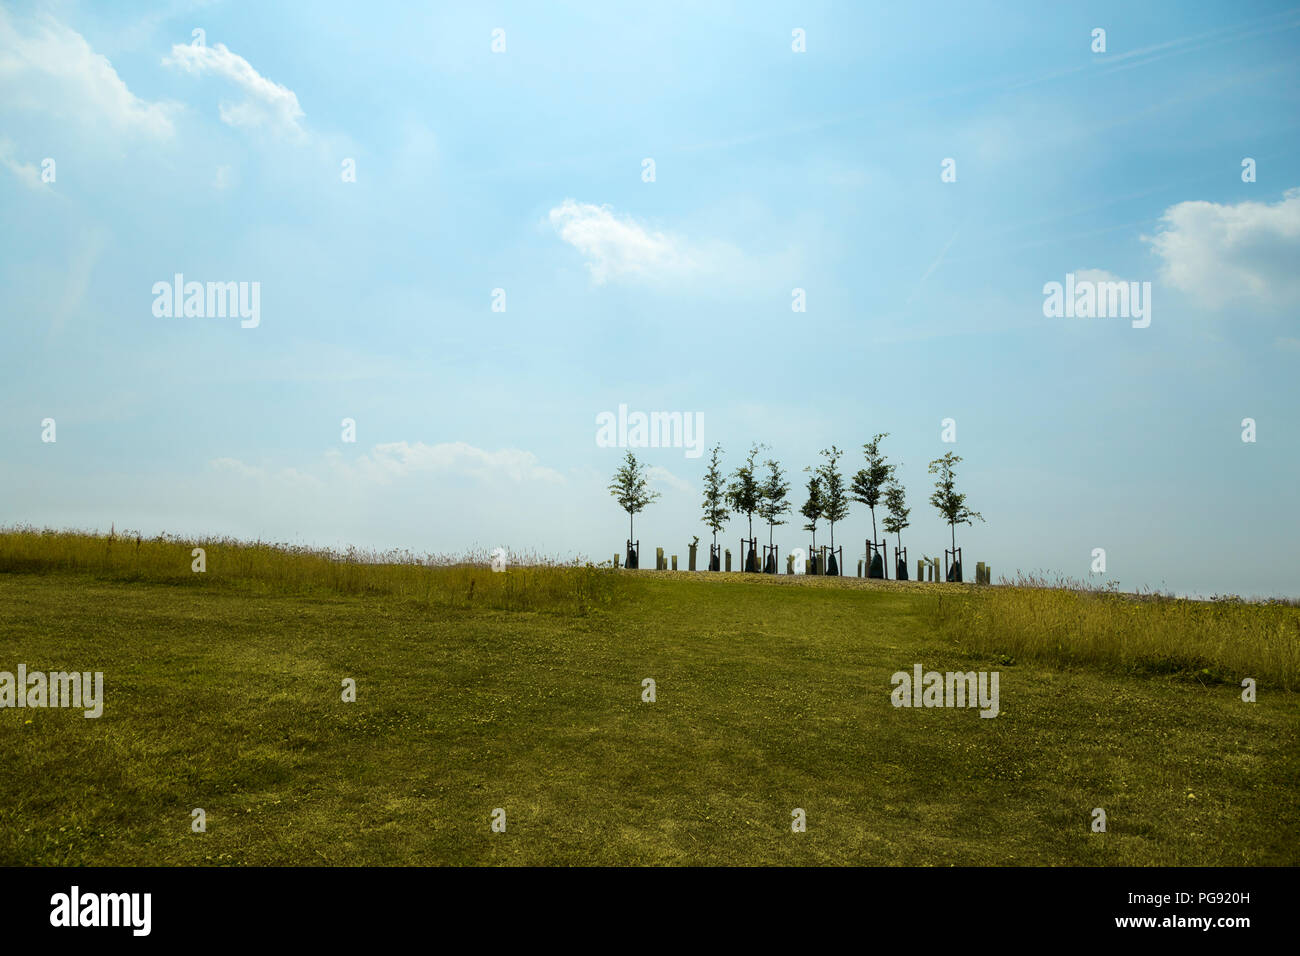 Small tiny trees silhouette at the top on horizon of wide lush green meadow Stock Photo